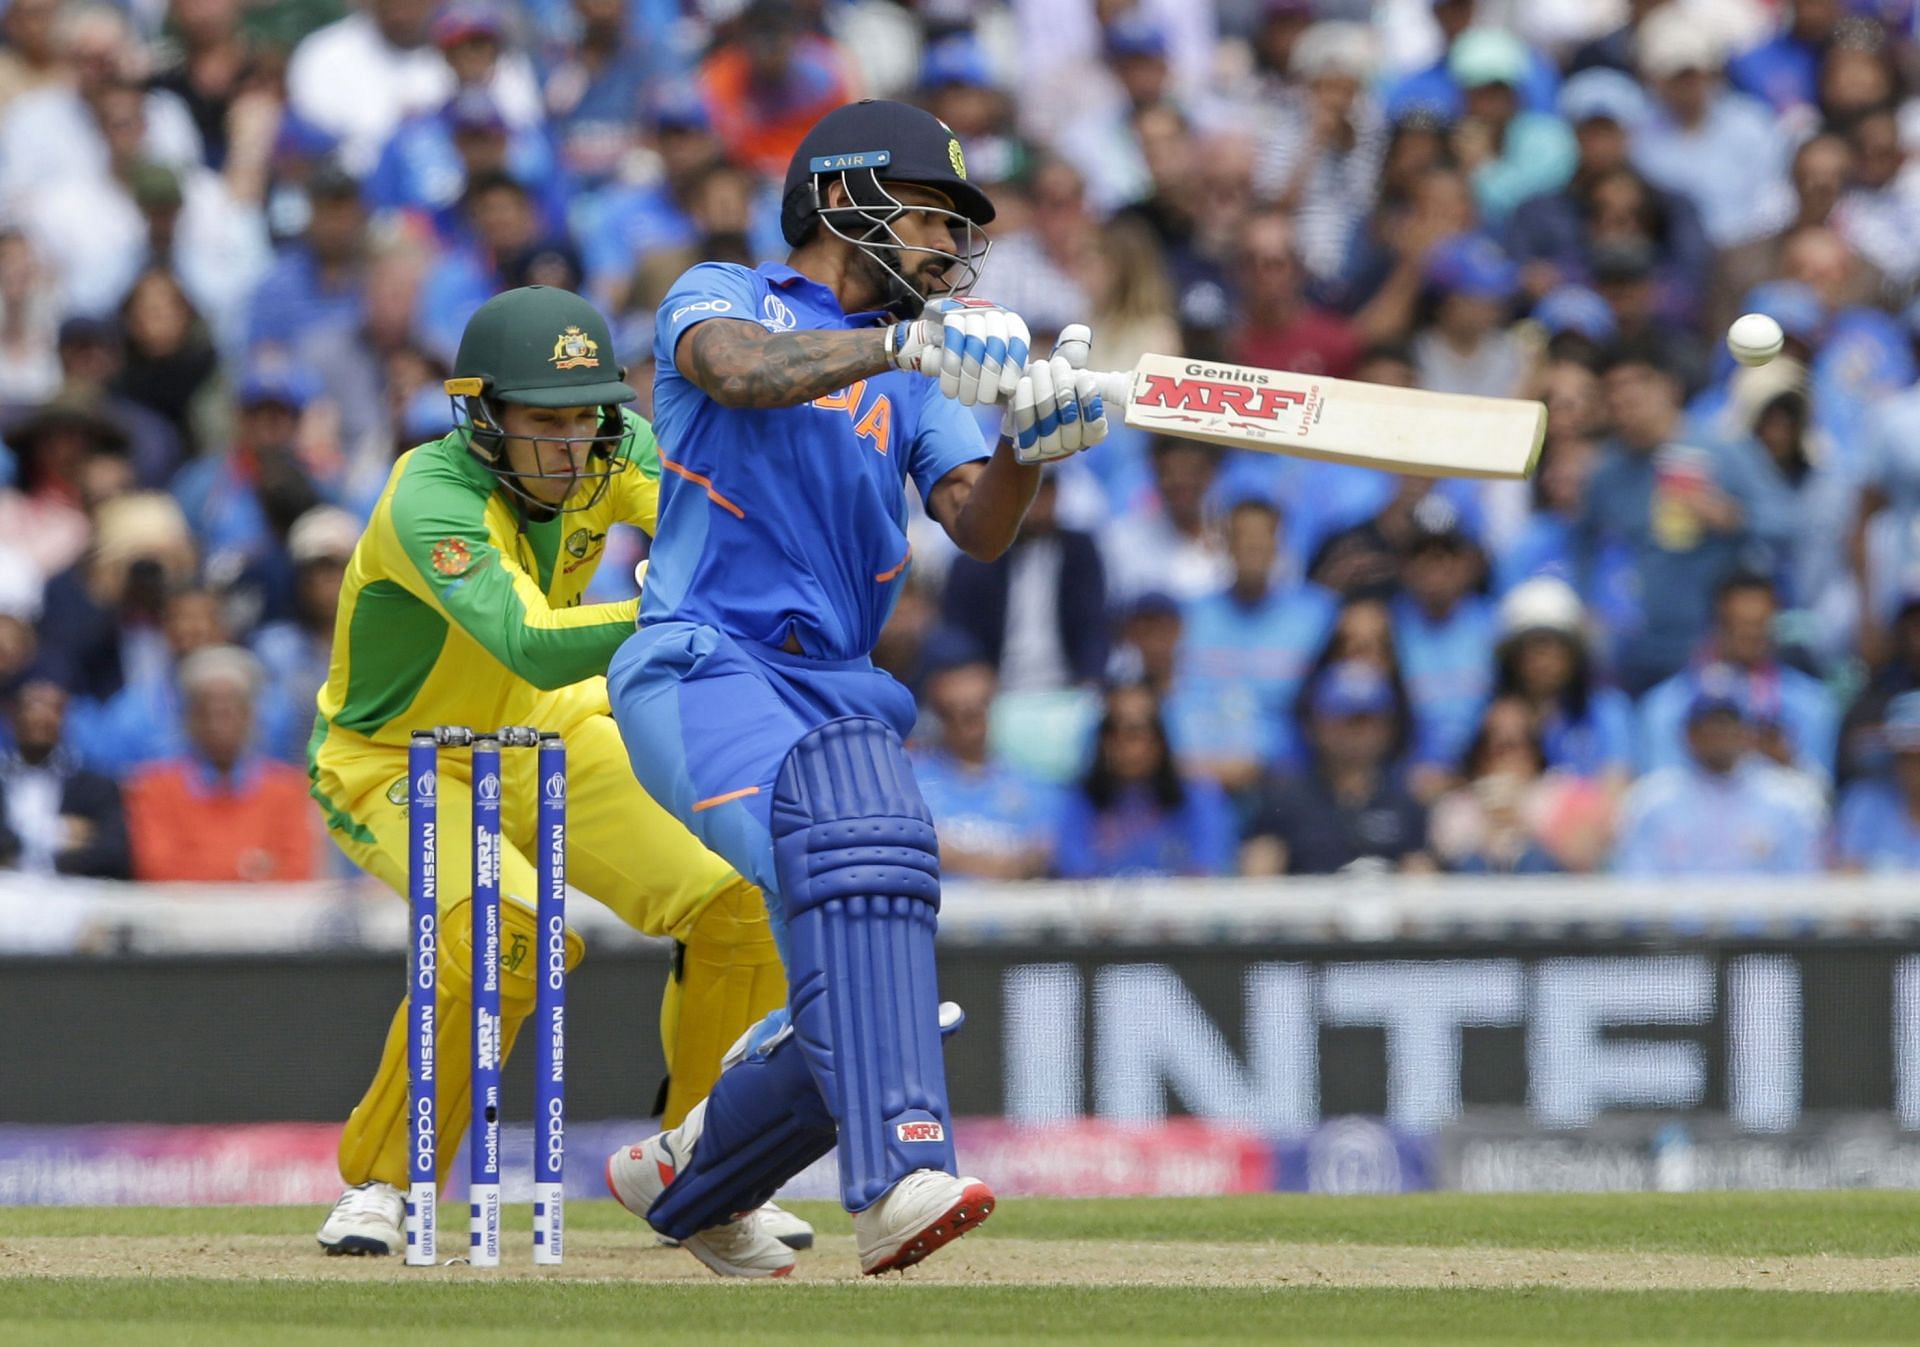 Shikhar Dhawan during his knock against the Aussies in the 2019 World Cup. (Pic: Getty Images)